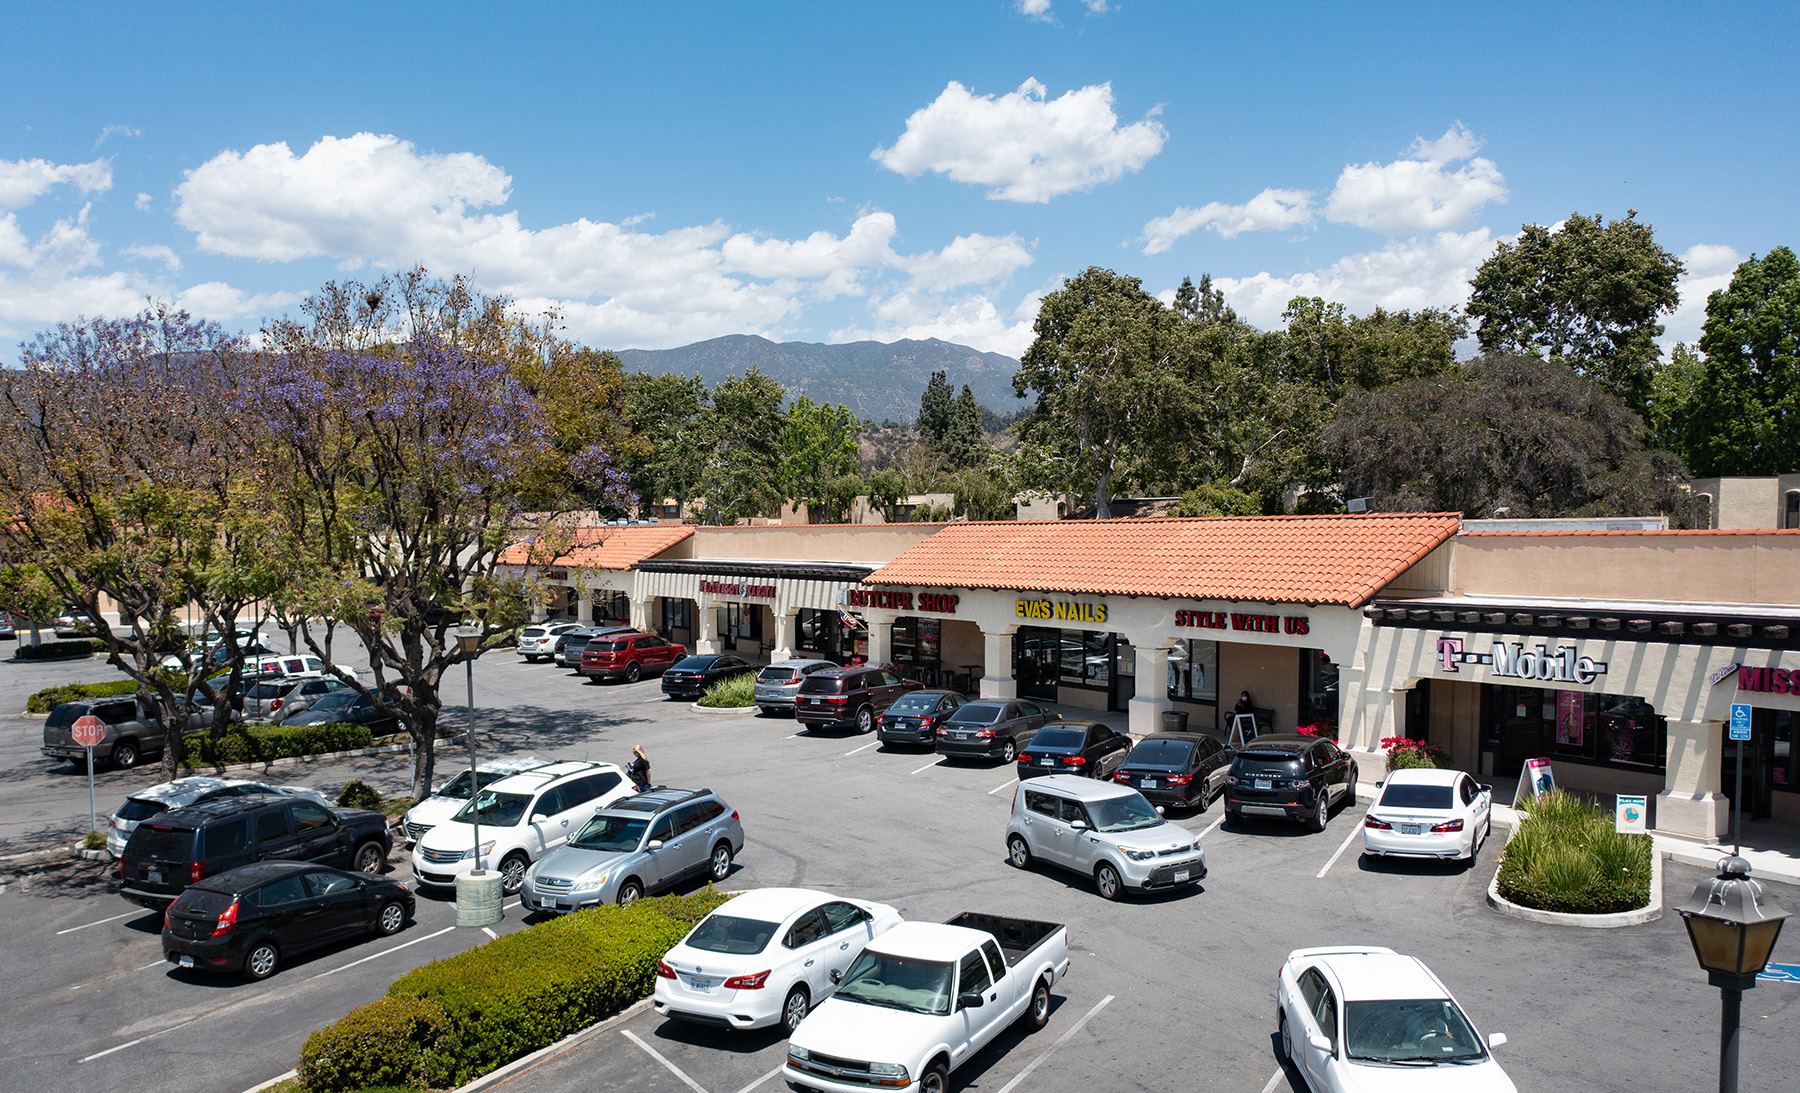 Hanley Investment Group Arranges Sale of 26,100 SF Multi-Tenant Retail Building in Los Angeles County for $8.6 Million